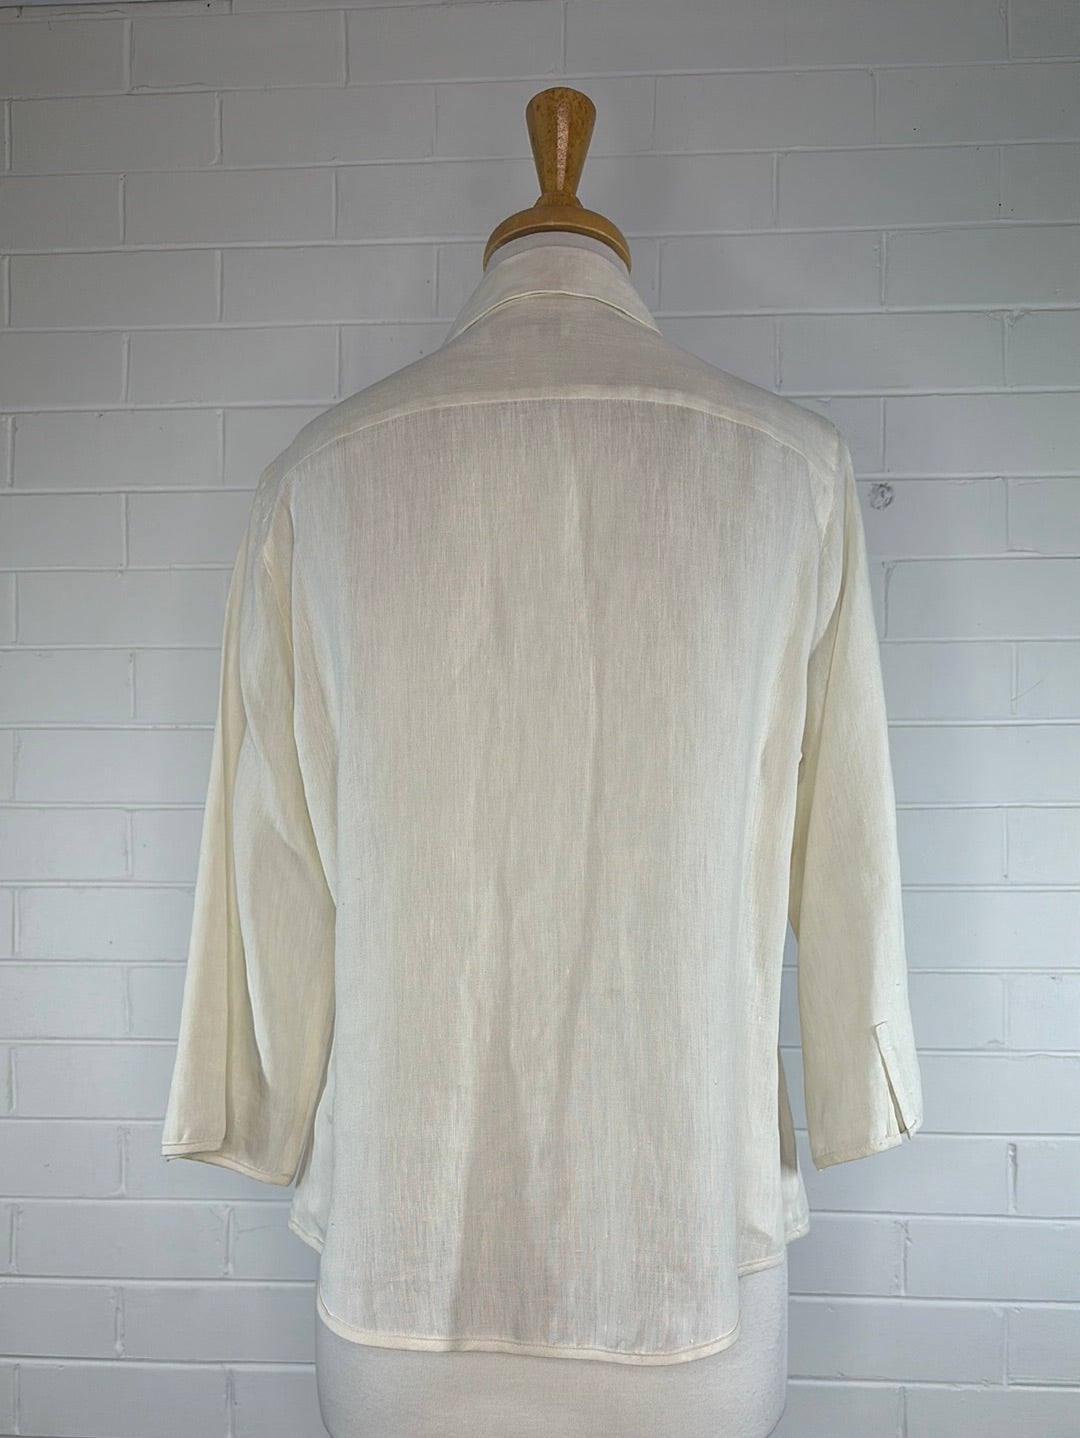 Country Road | shirt | size 14 | three quarter sleeve | 100% linen